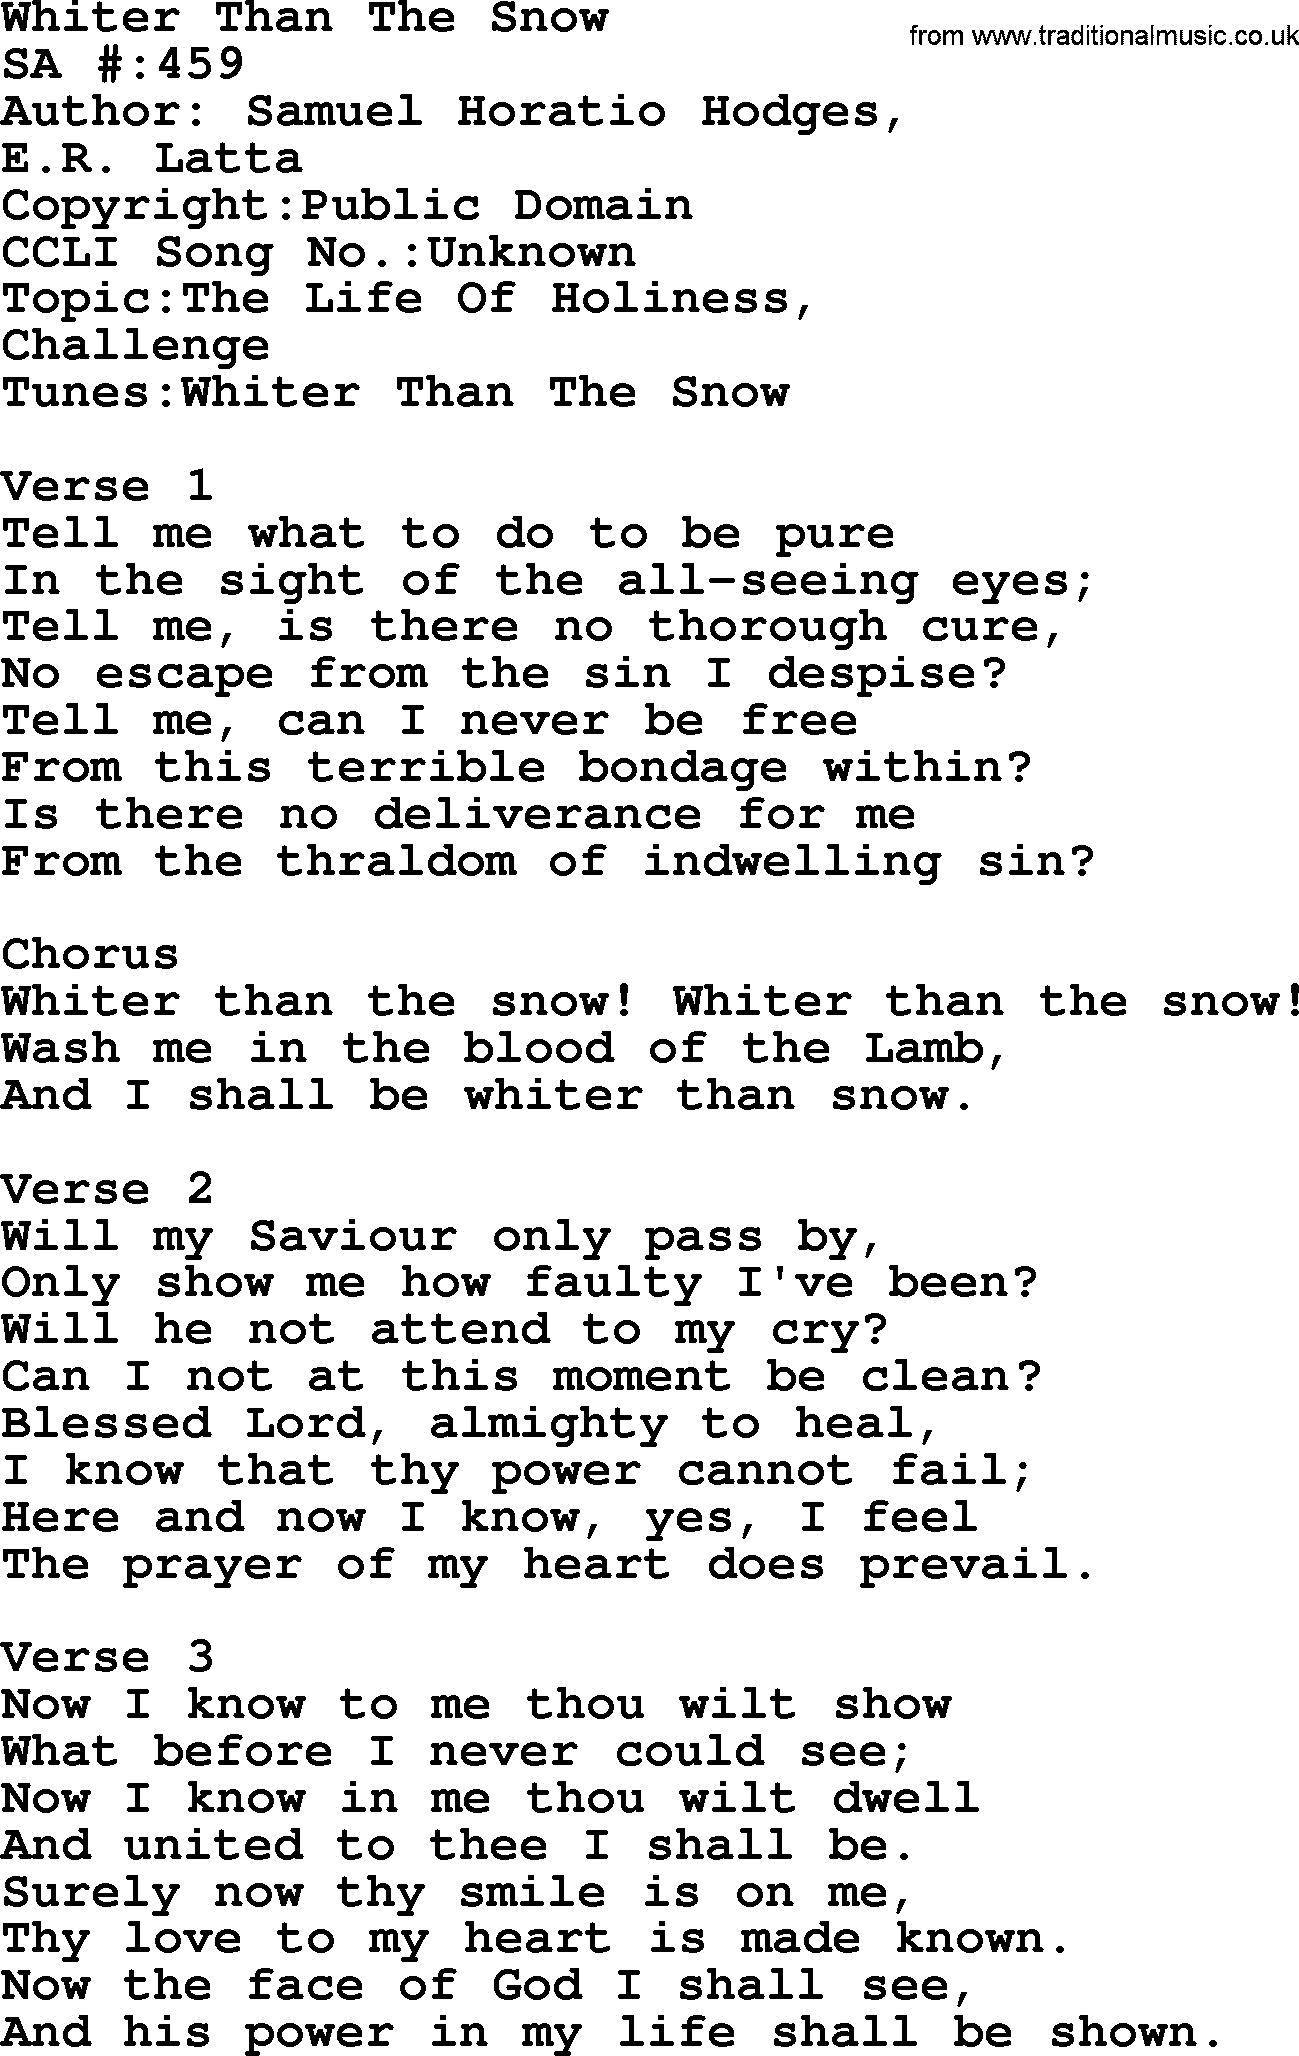 Salvation Army Hymnal, title: Whiter Than The Snow, with lyrics and PDF,